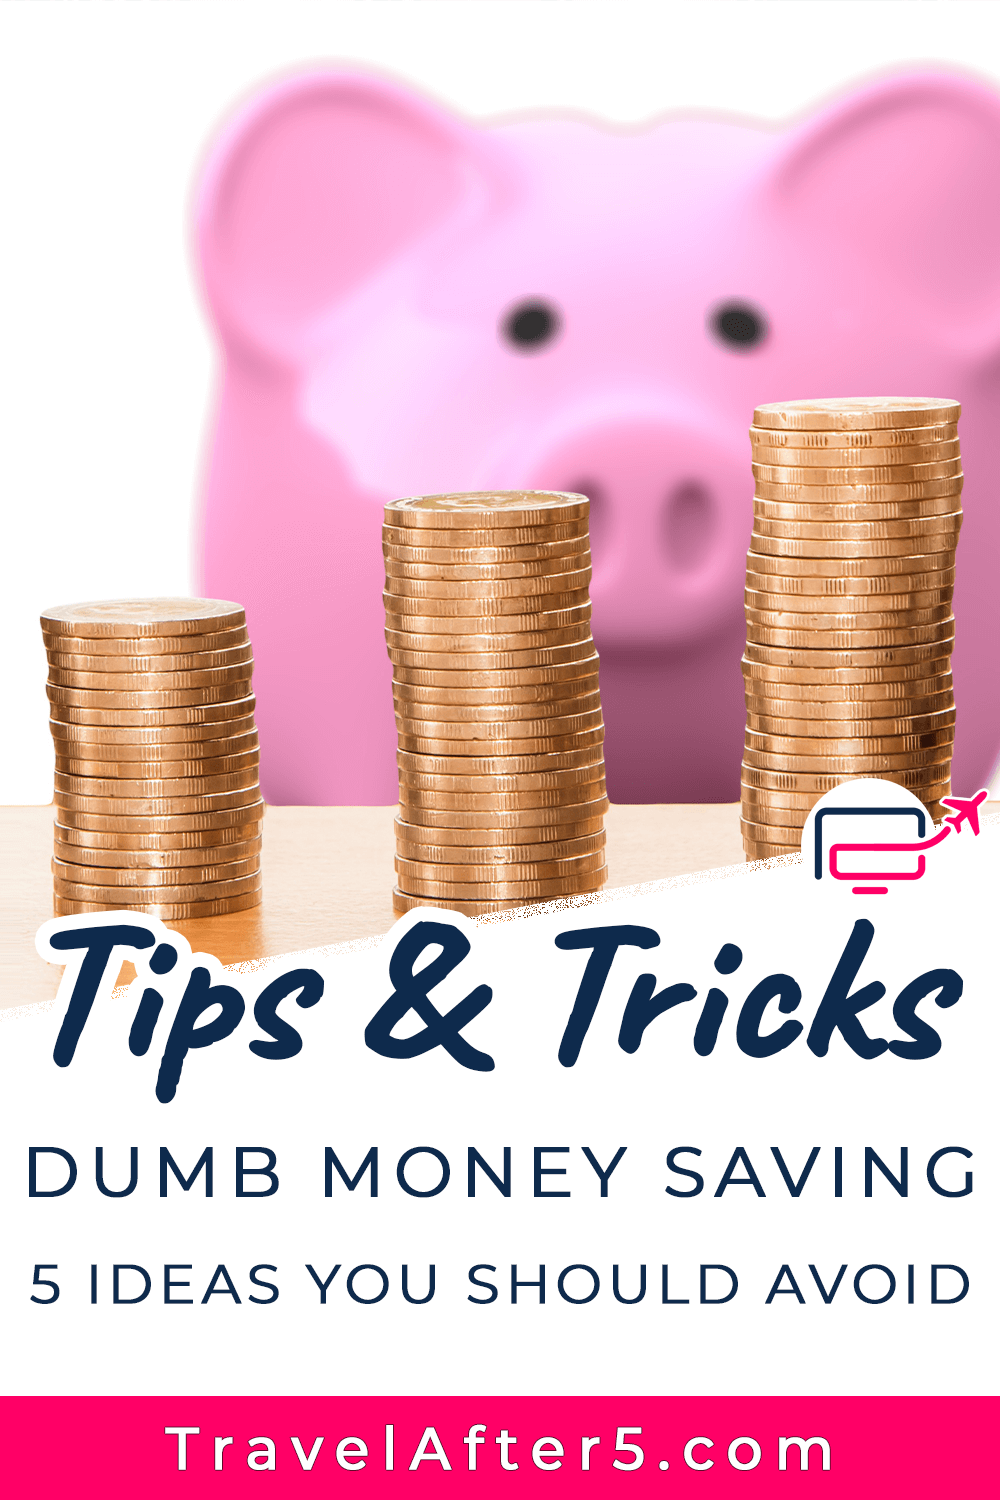 Pinterest Pin to Tips & Tricks: Dumb Money Saving - 5 Ideas to Avoid, by Travel After 5